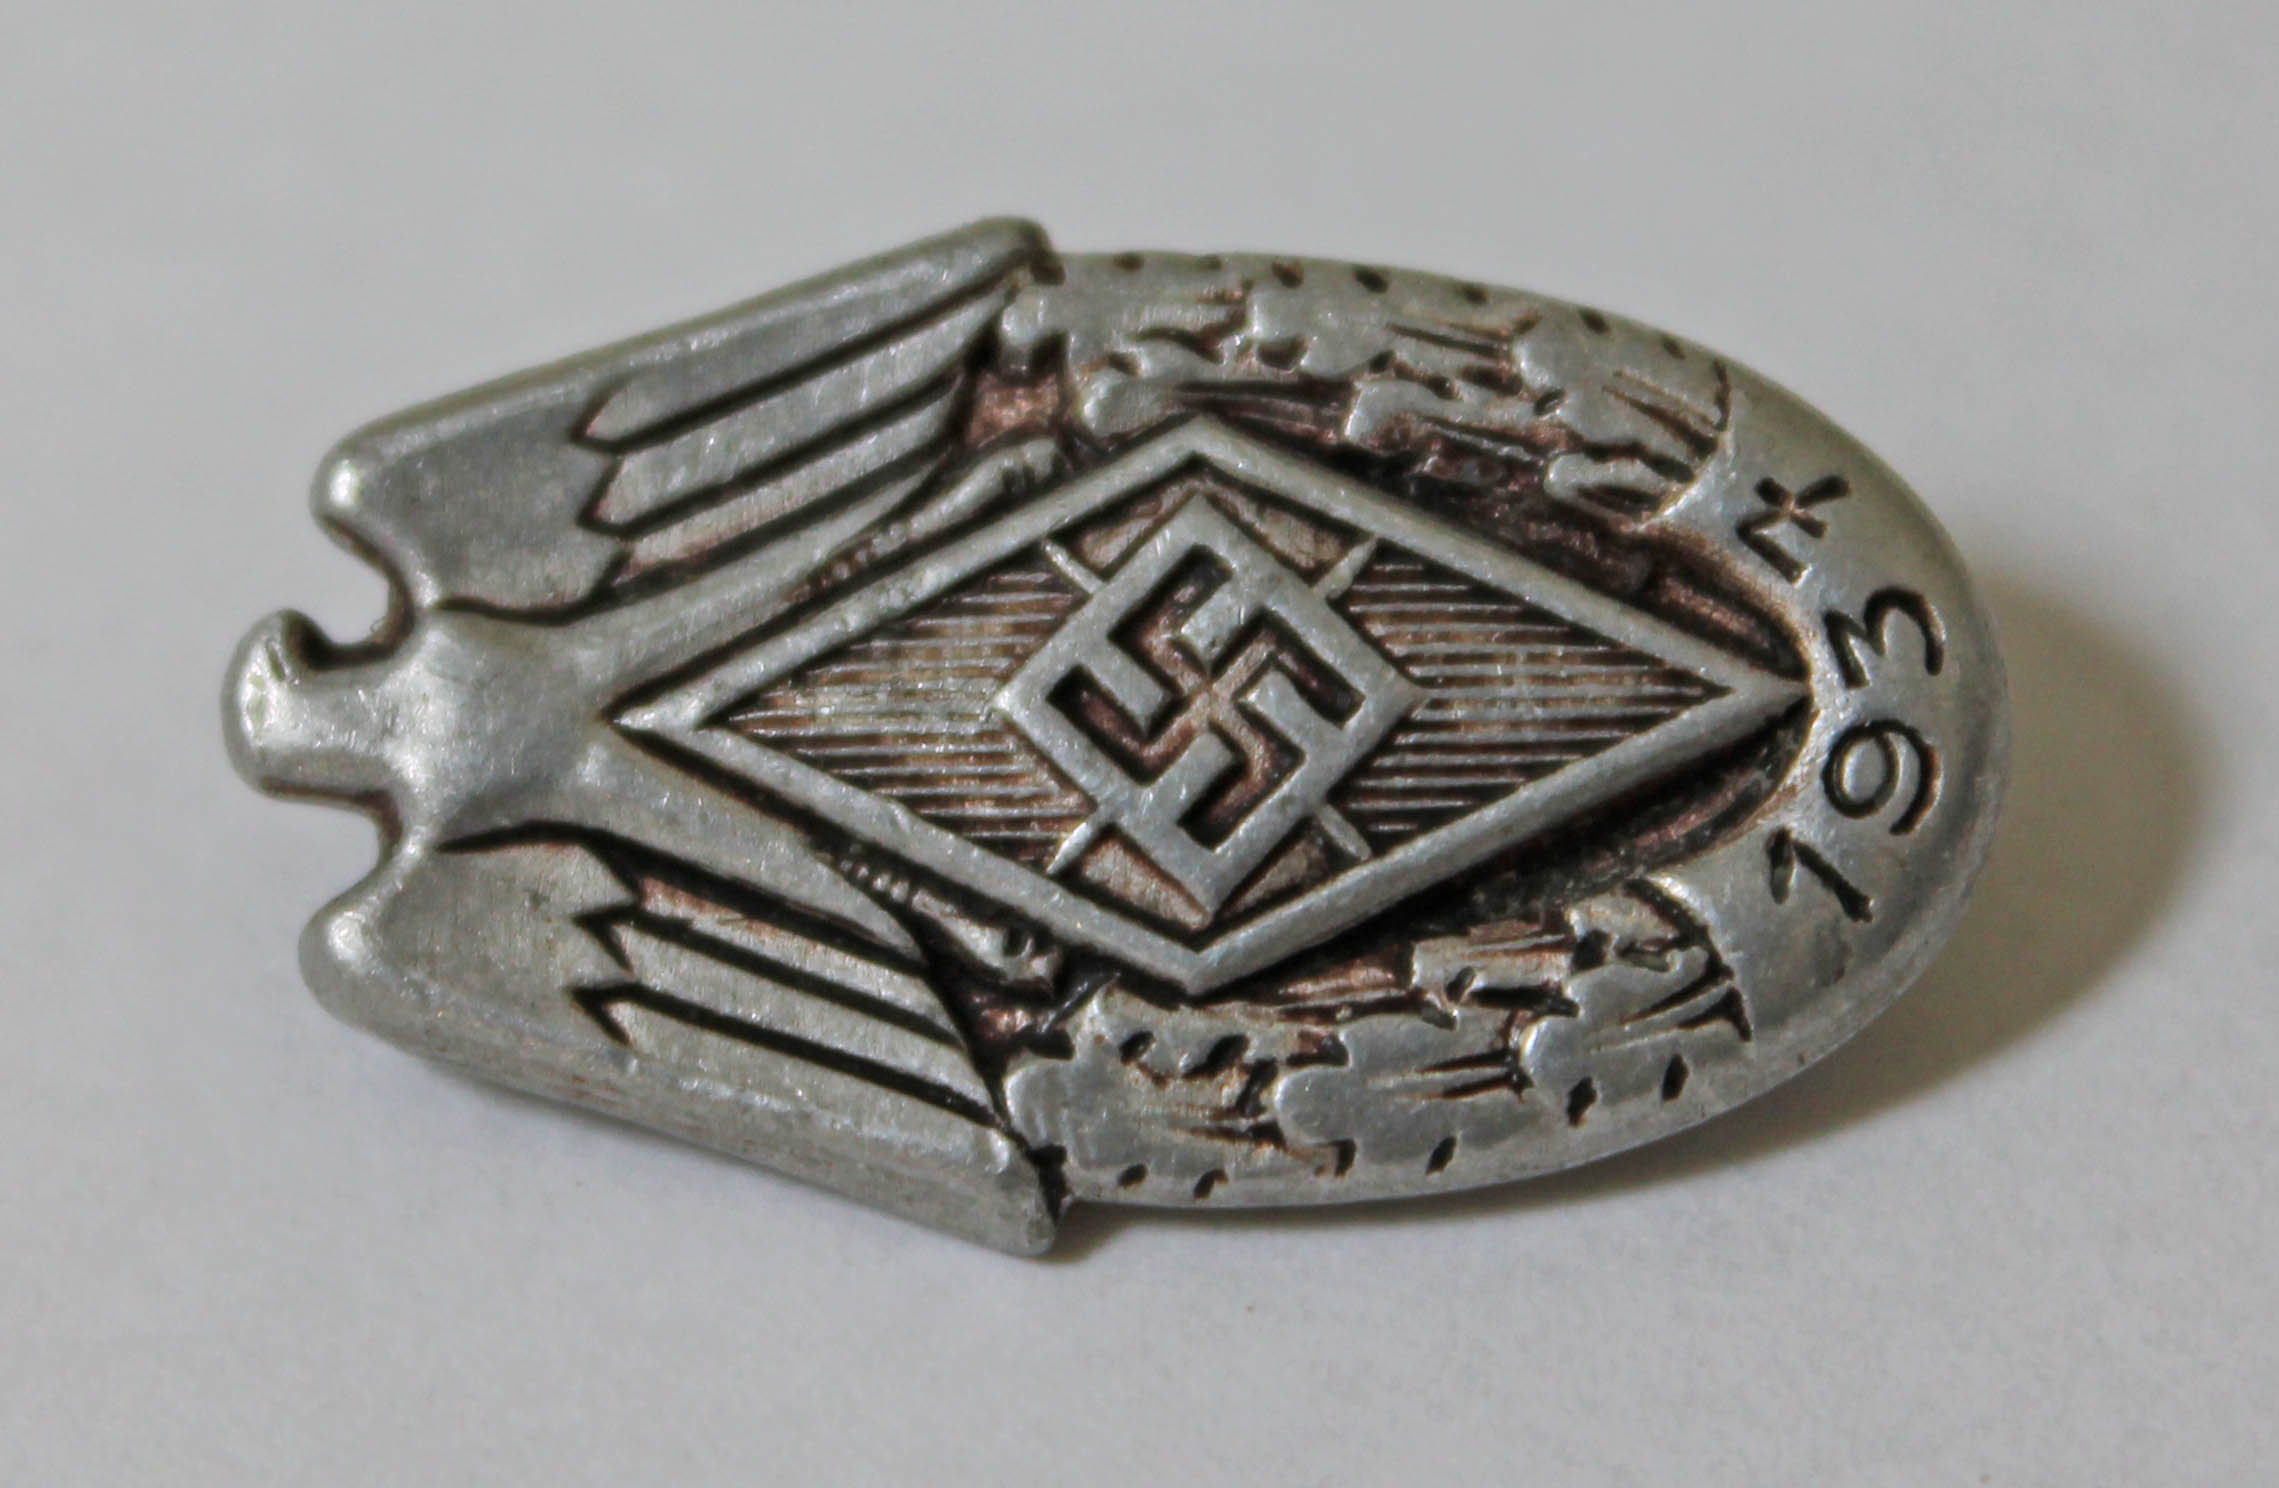 German WWII Nazi medals and badges including an eastern front medal. - Image 3 of 3